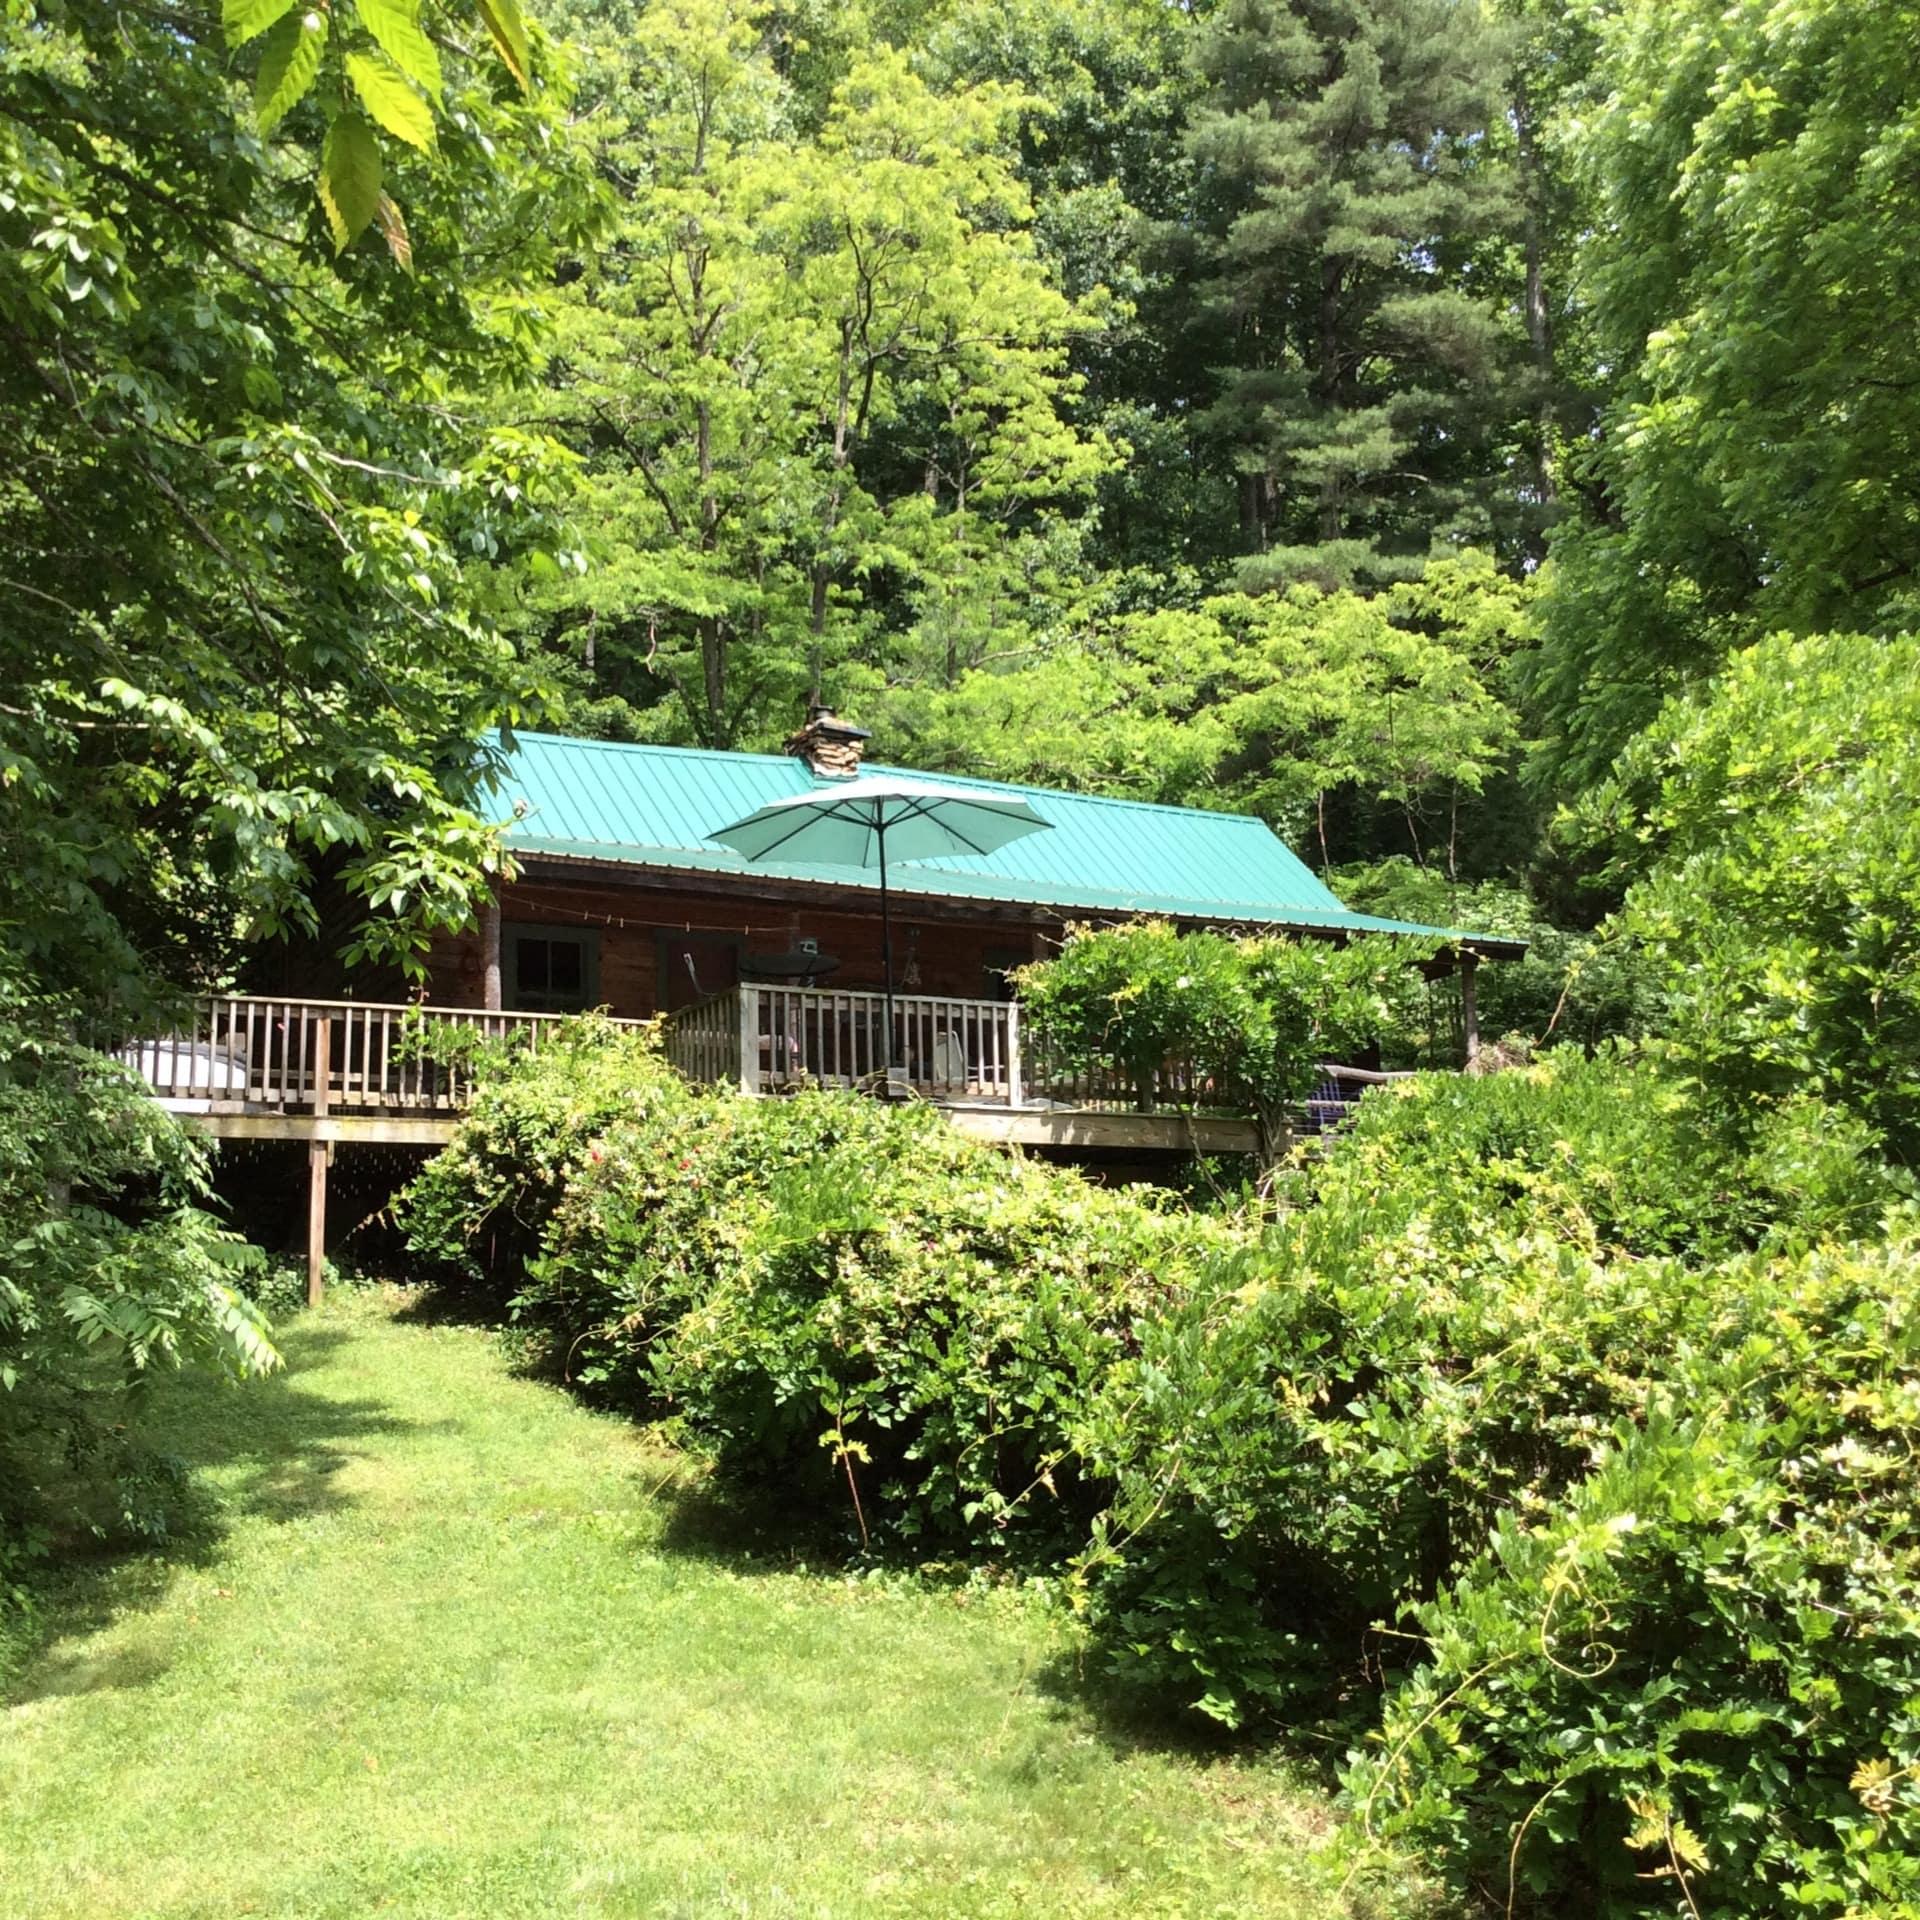 Secluded cabin rental with spacious deck surrounded by lush greenery